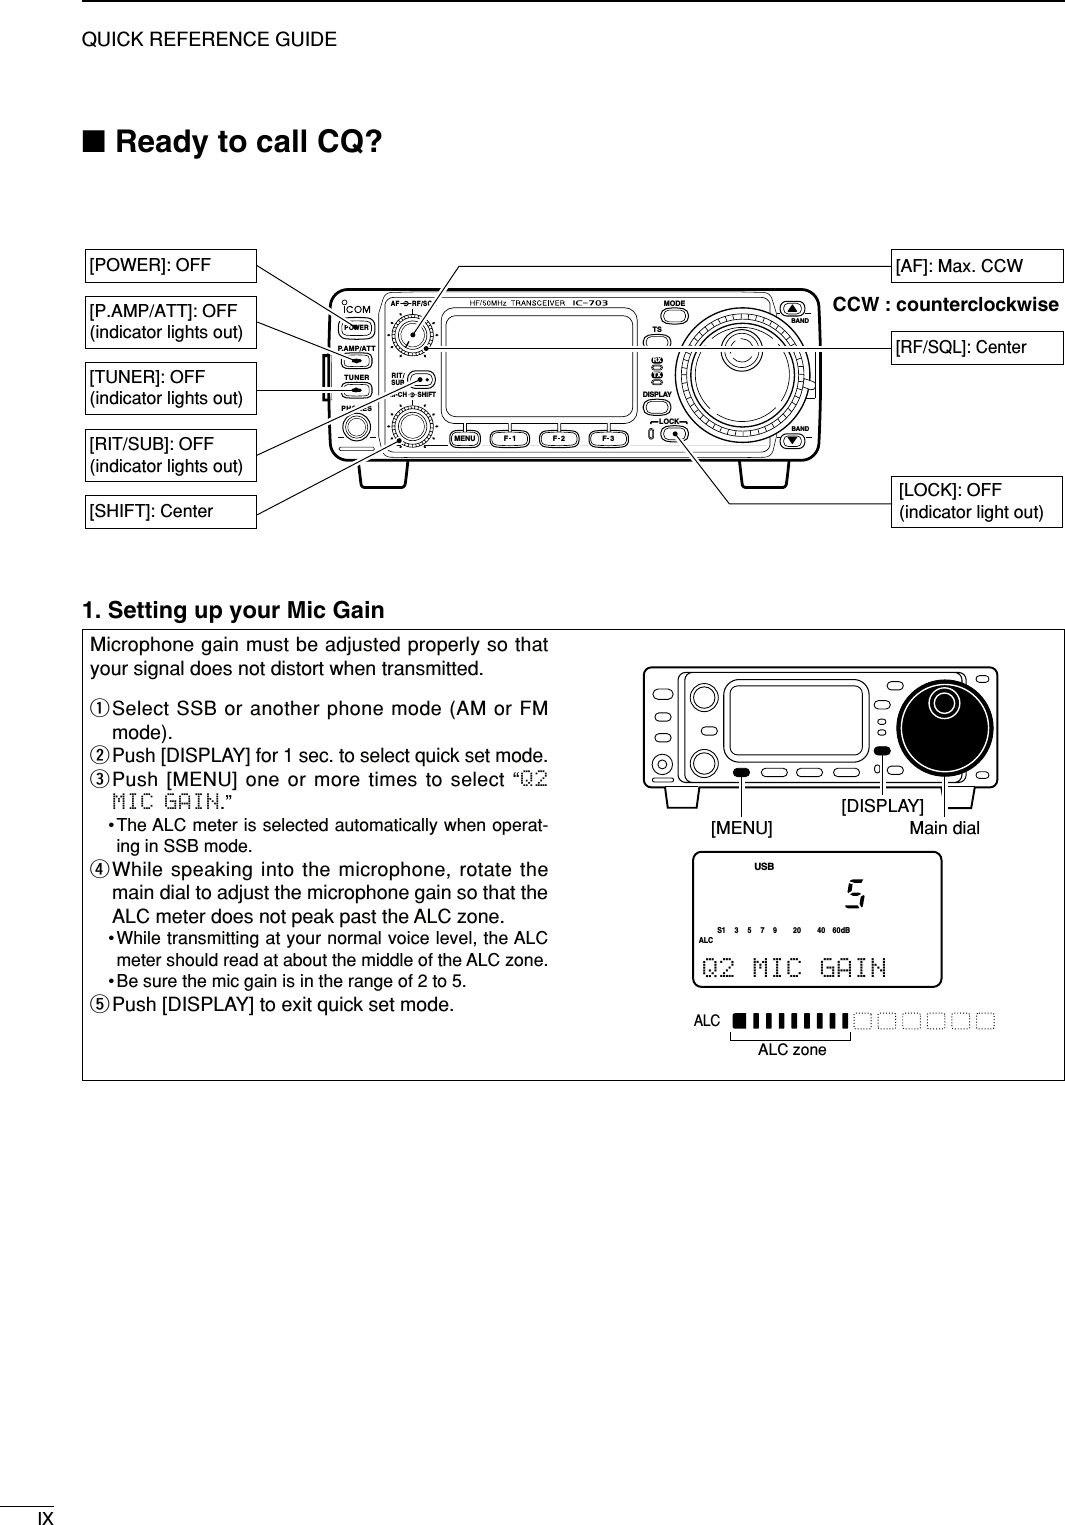 IXQUICK REFERENCE GUIDE1. Setting up your Mic GainMicrophone gain must be adjusted properly so thatyour signal does not distort when transmitted.qSelect SSB or another phone mode (AM or FMmode).wPush [DISPLAY] for 1 sec. to select quick set mode.ePush [MENU] one or more times to select “Q2MIC GAIN.”•The ALC meter is selected automatically when operat-ing in SSB mode.rWhile speaking into the microphone, rotate themain dial to adjust the microphone gain so that theALC meter does not peak past the ALC zone.•While transmitting at your normal voice level, the ALCmeter should read at about the middle of the ALC zone.• Be sure the mic gain is in the range of 2 to 5.tPush [DISPLAY] to exit quick set mode.ALCALC zoneALCS1 537920 40 60dBUSBQ2 MIC GAIN[MENU] Main dial[DISPLAY]■Ready to call CQ?BANDBANDMODETSDISPLAYLOCKF 1 F 2 F 3AF RF SQLRITSHIFTM-CHSUBPHONESTUNERP.AMP AT TYZPOWERMENUTXRX[AF]: Max. CCW[RF/SQL]: Center[LOCK]: OFF(indicator light out)[POWER]: OFF[SHIFT]: Center[P.AMP/ATT]: OFF(indicator lights out)[TUNER]: OFF(indicator lights out)[RIT/SUB]: OFF(indicator lights out)CCW : counterclockwise